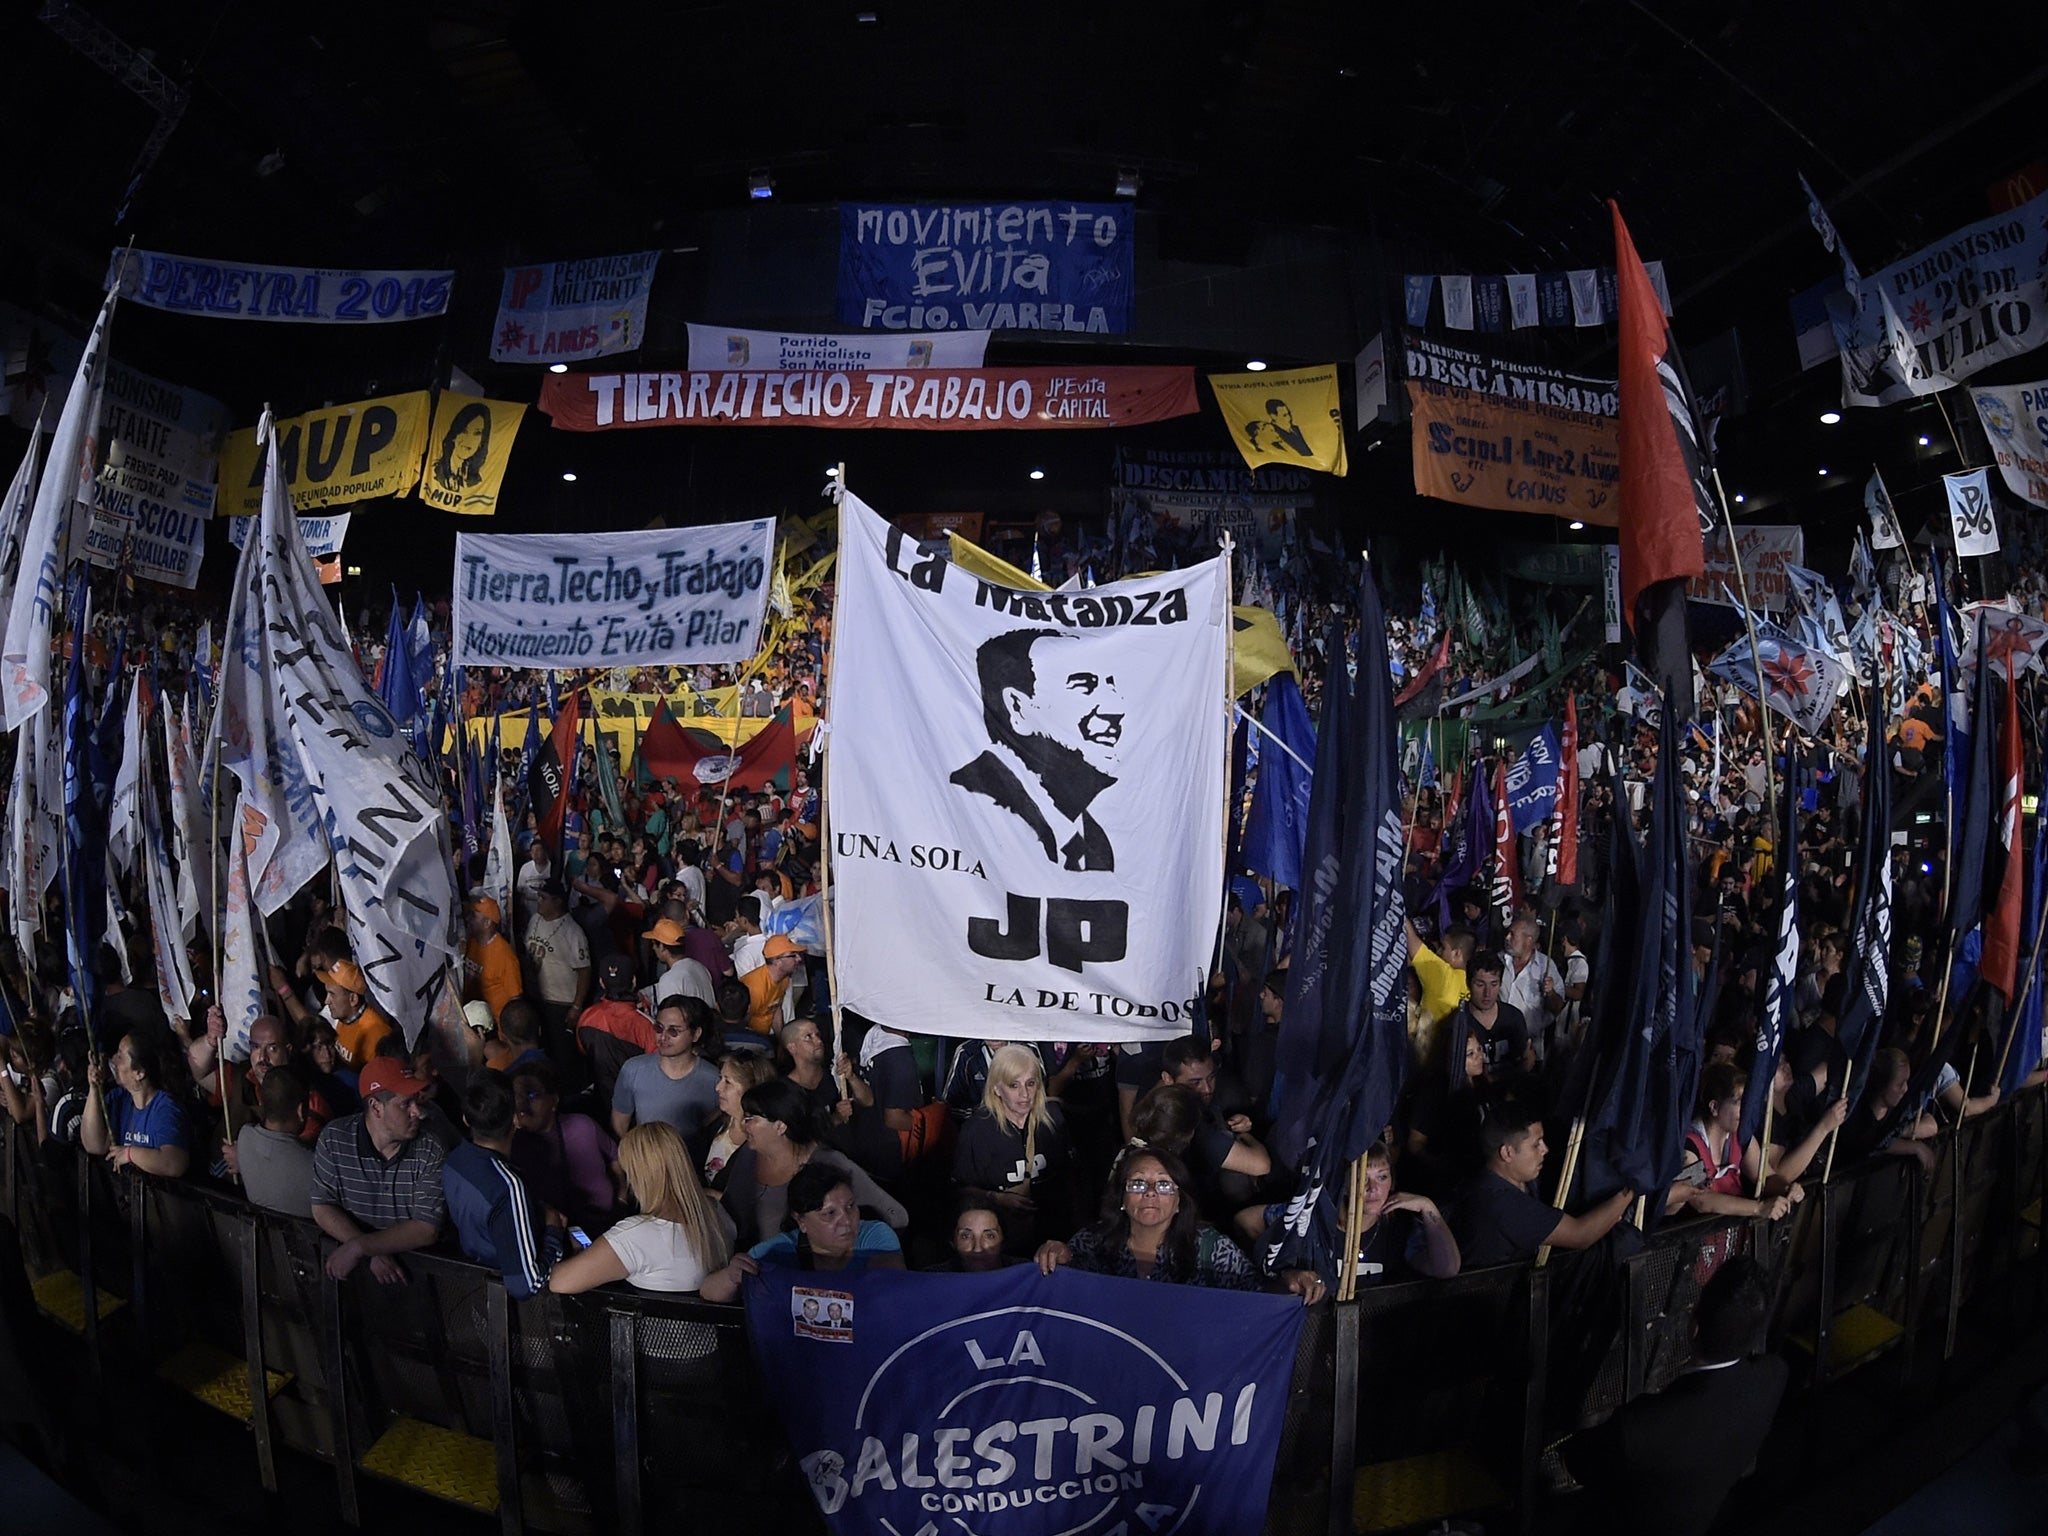 Supporters of the ruling party’s candidate, Buenos Aires governor Daniel Scioli, who is Cristina Kirchner’s chosen successor, at the Luna Park rally